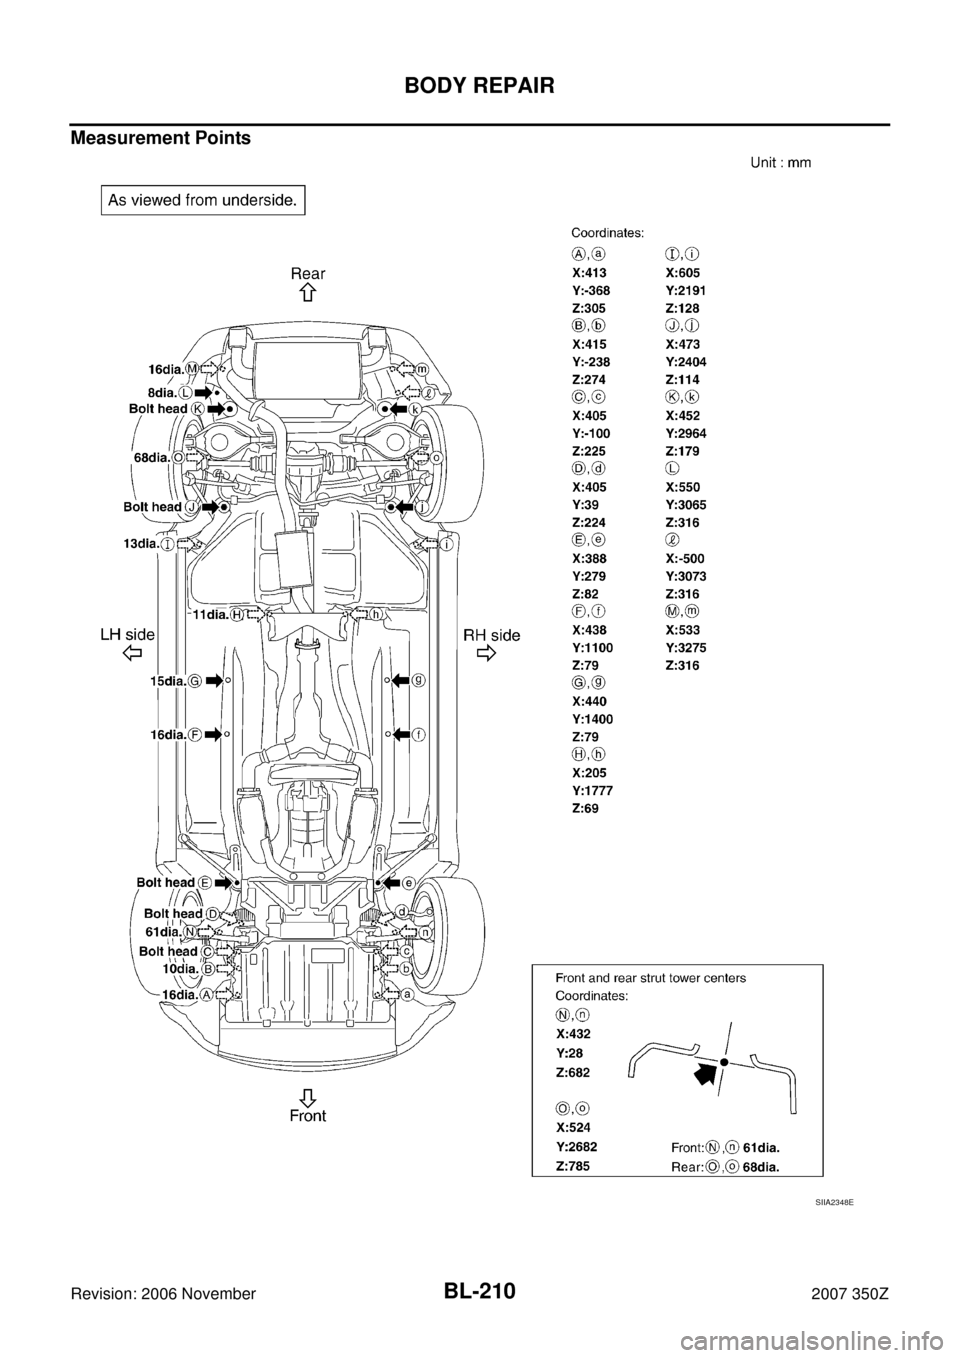 NISSAN 350Z 2007 Z33 Body, Lock And Security System Workshop Manual BL-210
BODY REPAIR
Revision: 2006 November2007 350Z
Measurement Points
SIIA2348E 